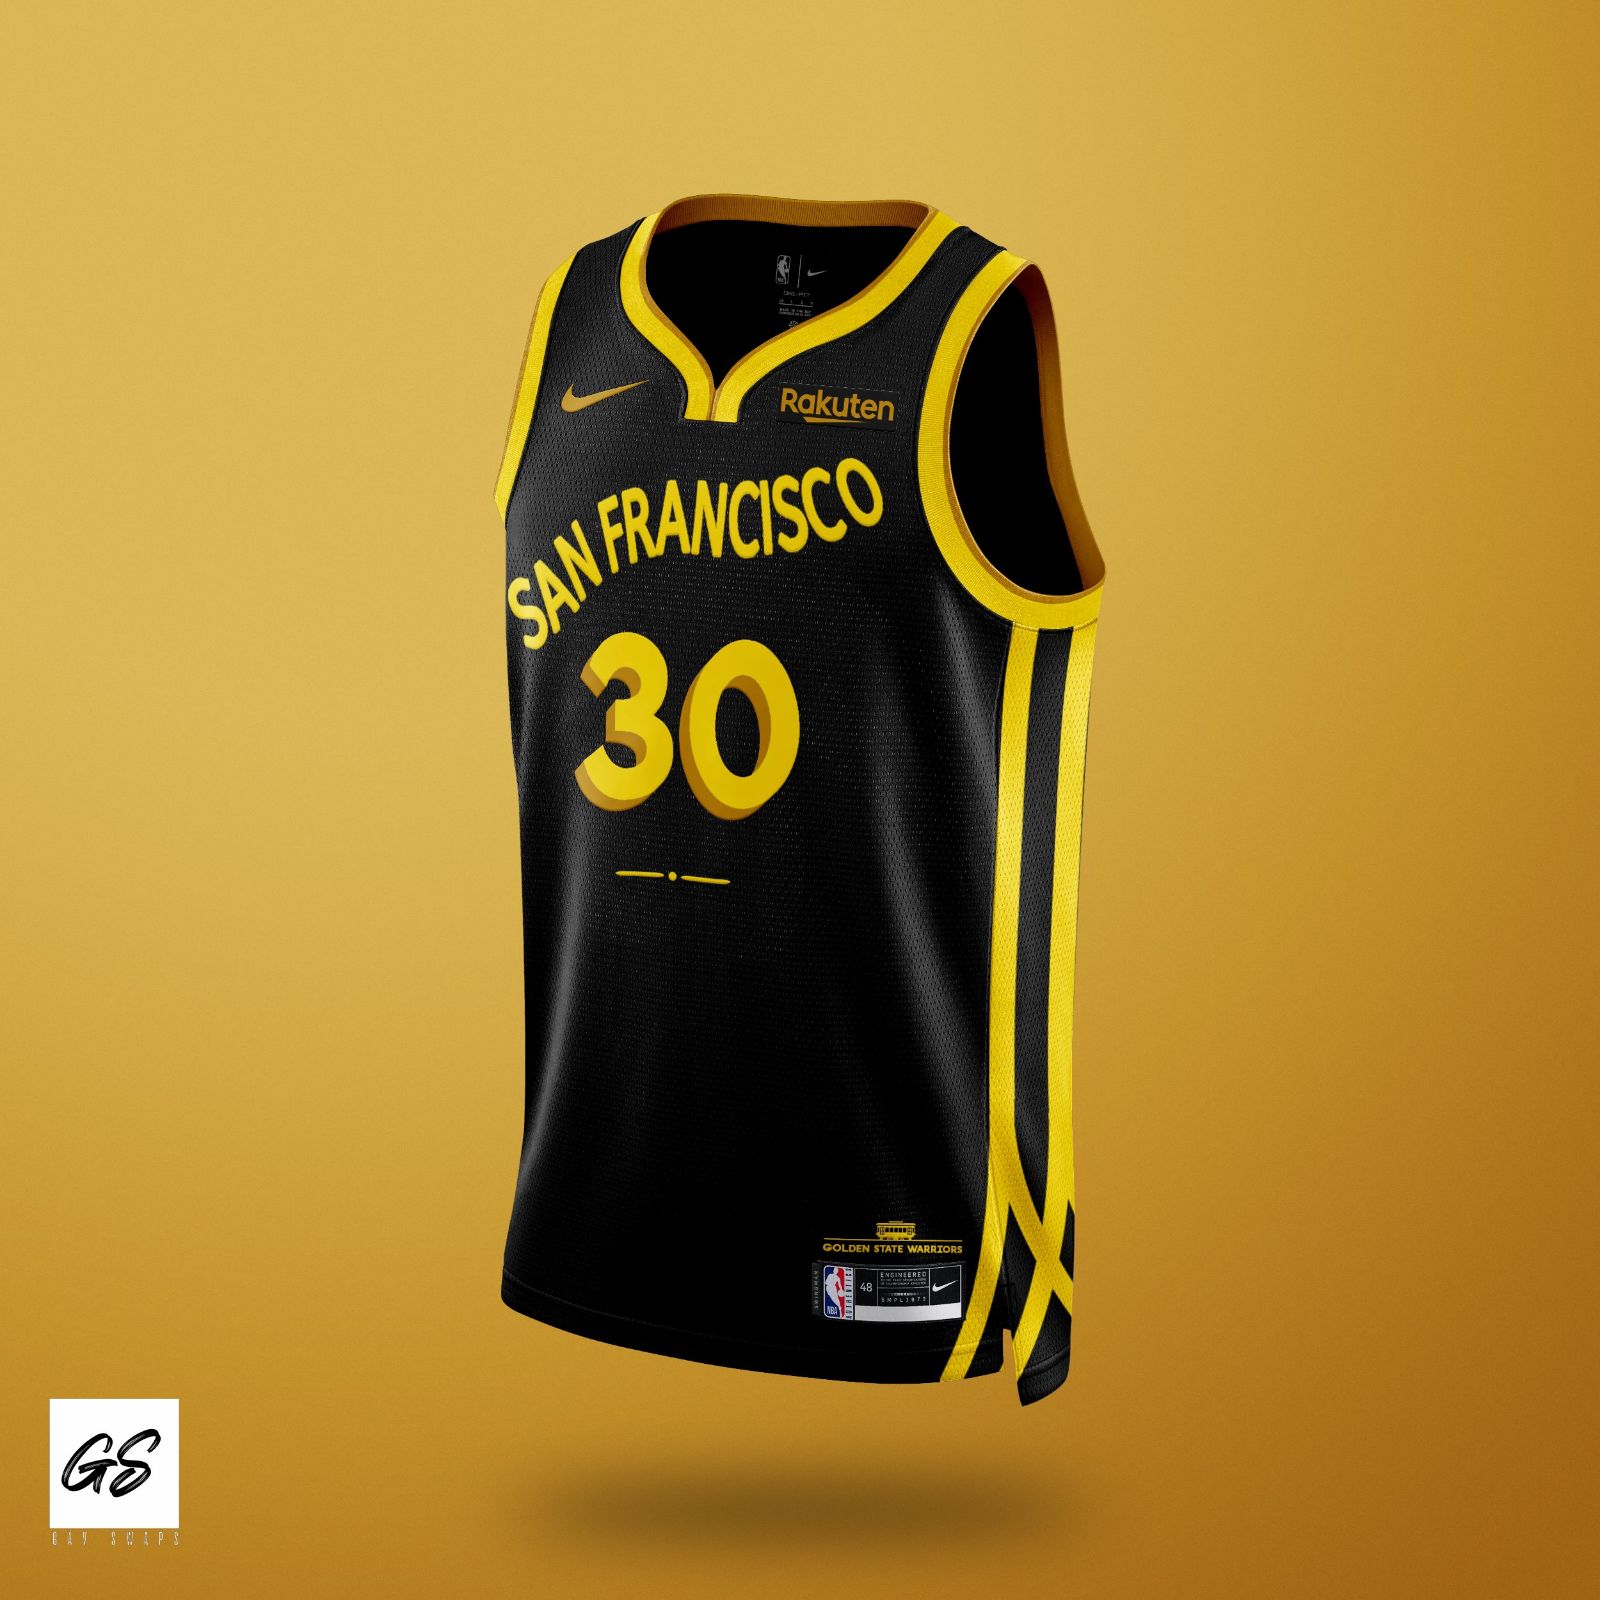 Giving 60% off/clearance rack at Marshalls vibes – Leaked photos of  Warriors & Heat jerseys for 2023-24 NBA season has fans mocking Nike